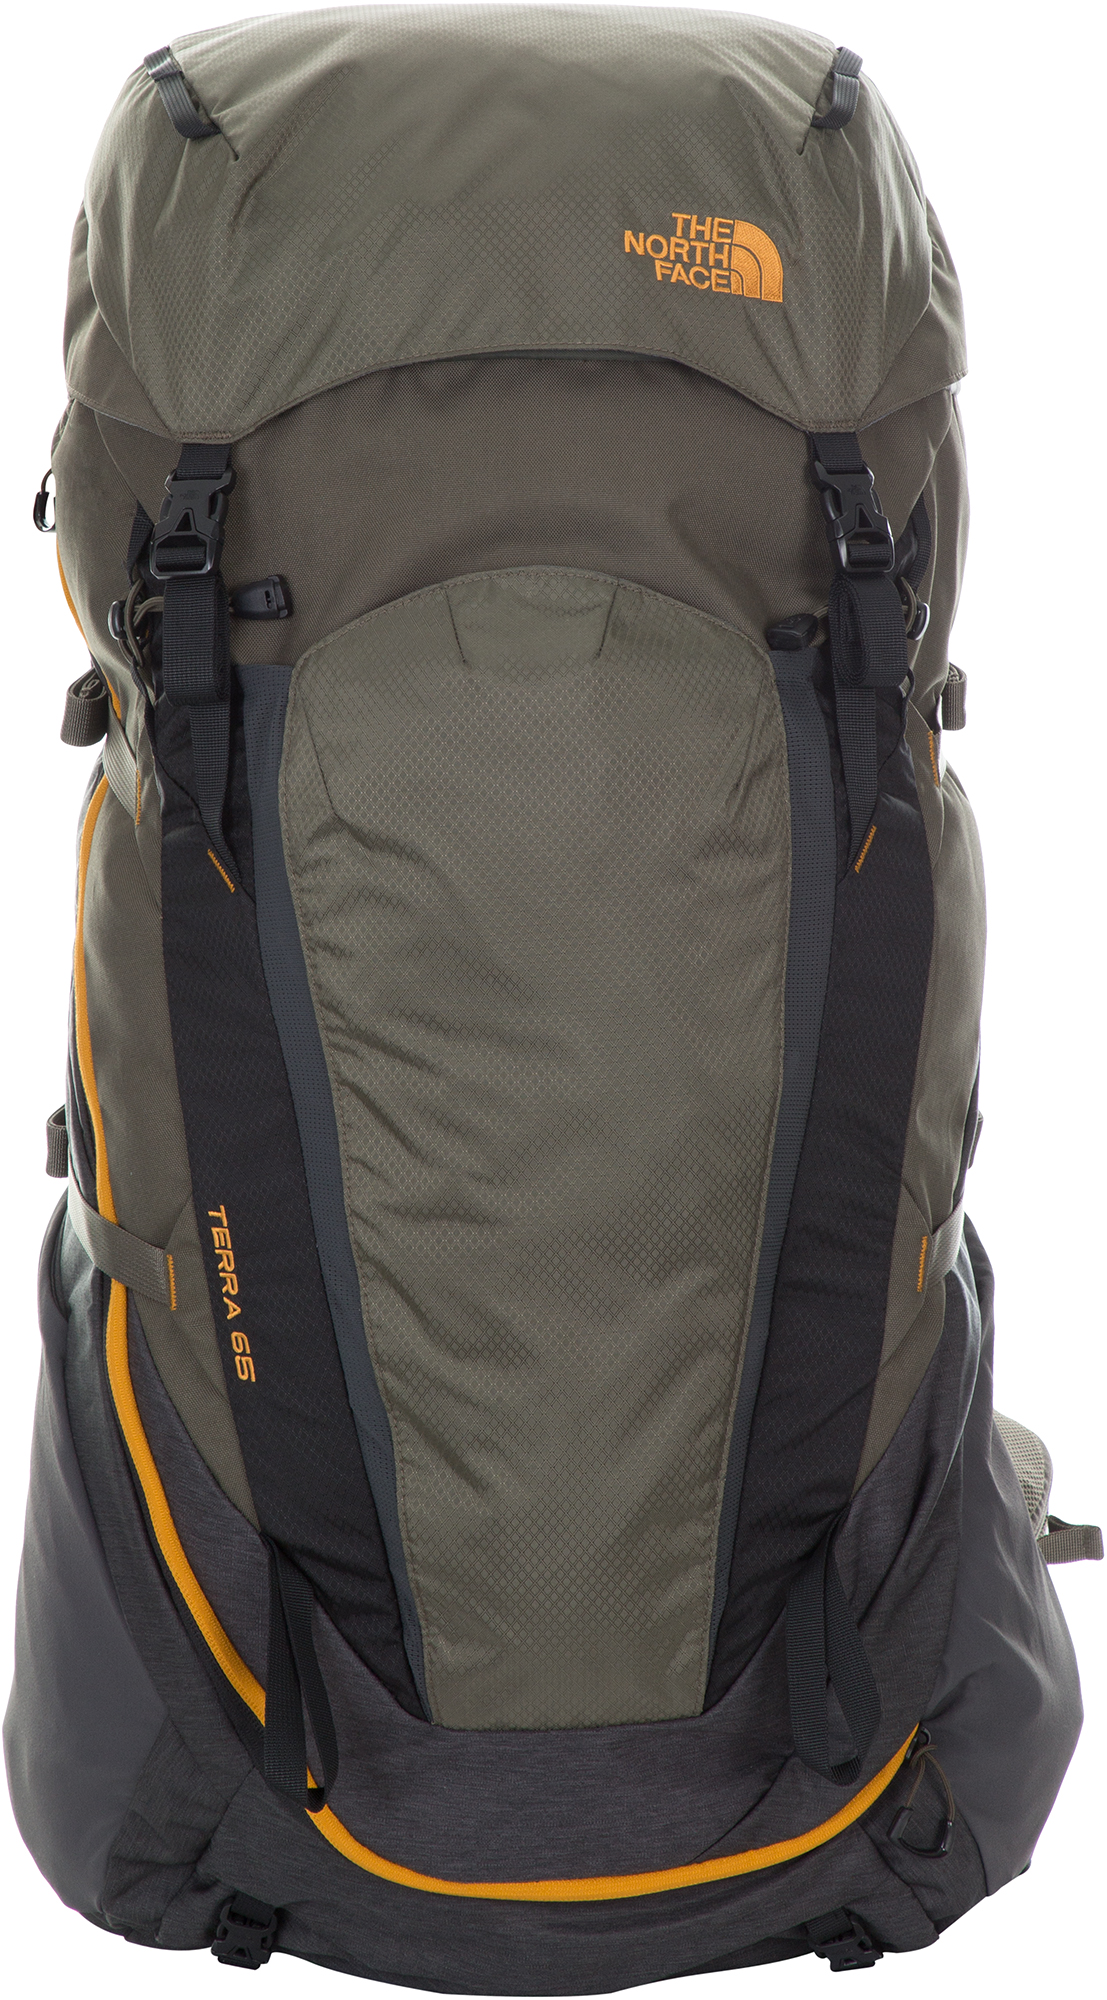 The North Face The North Face Terra 65